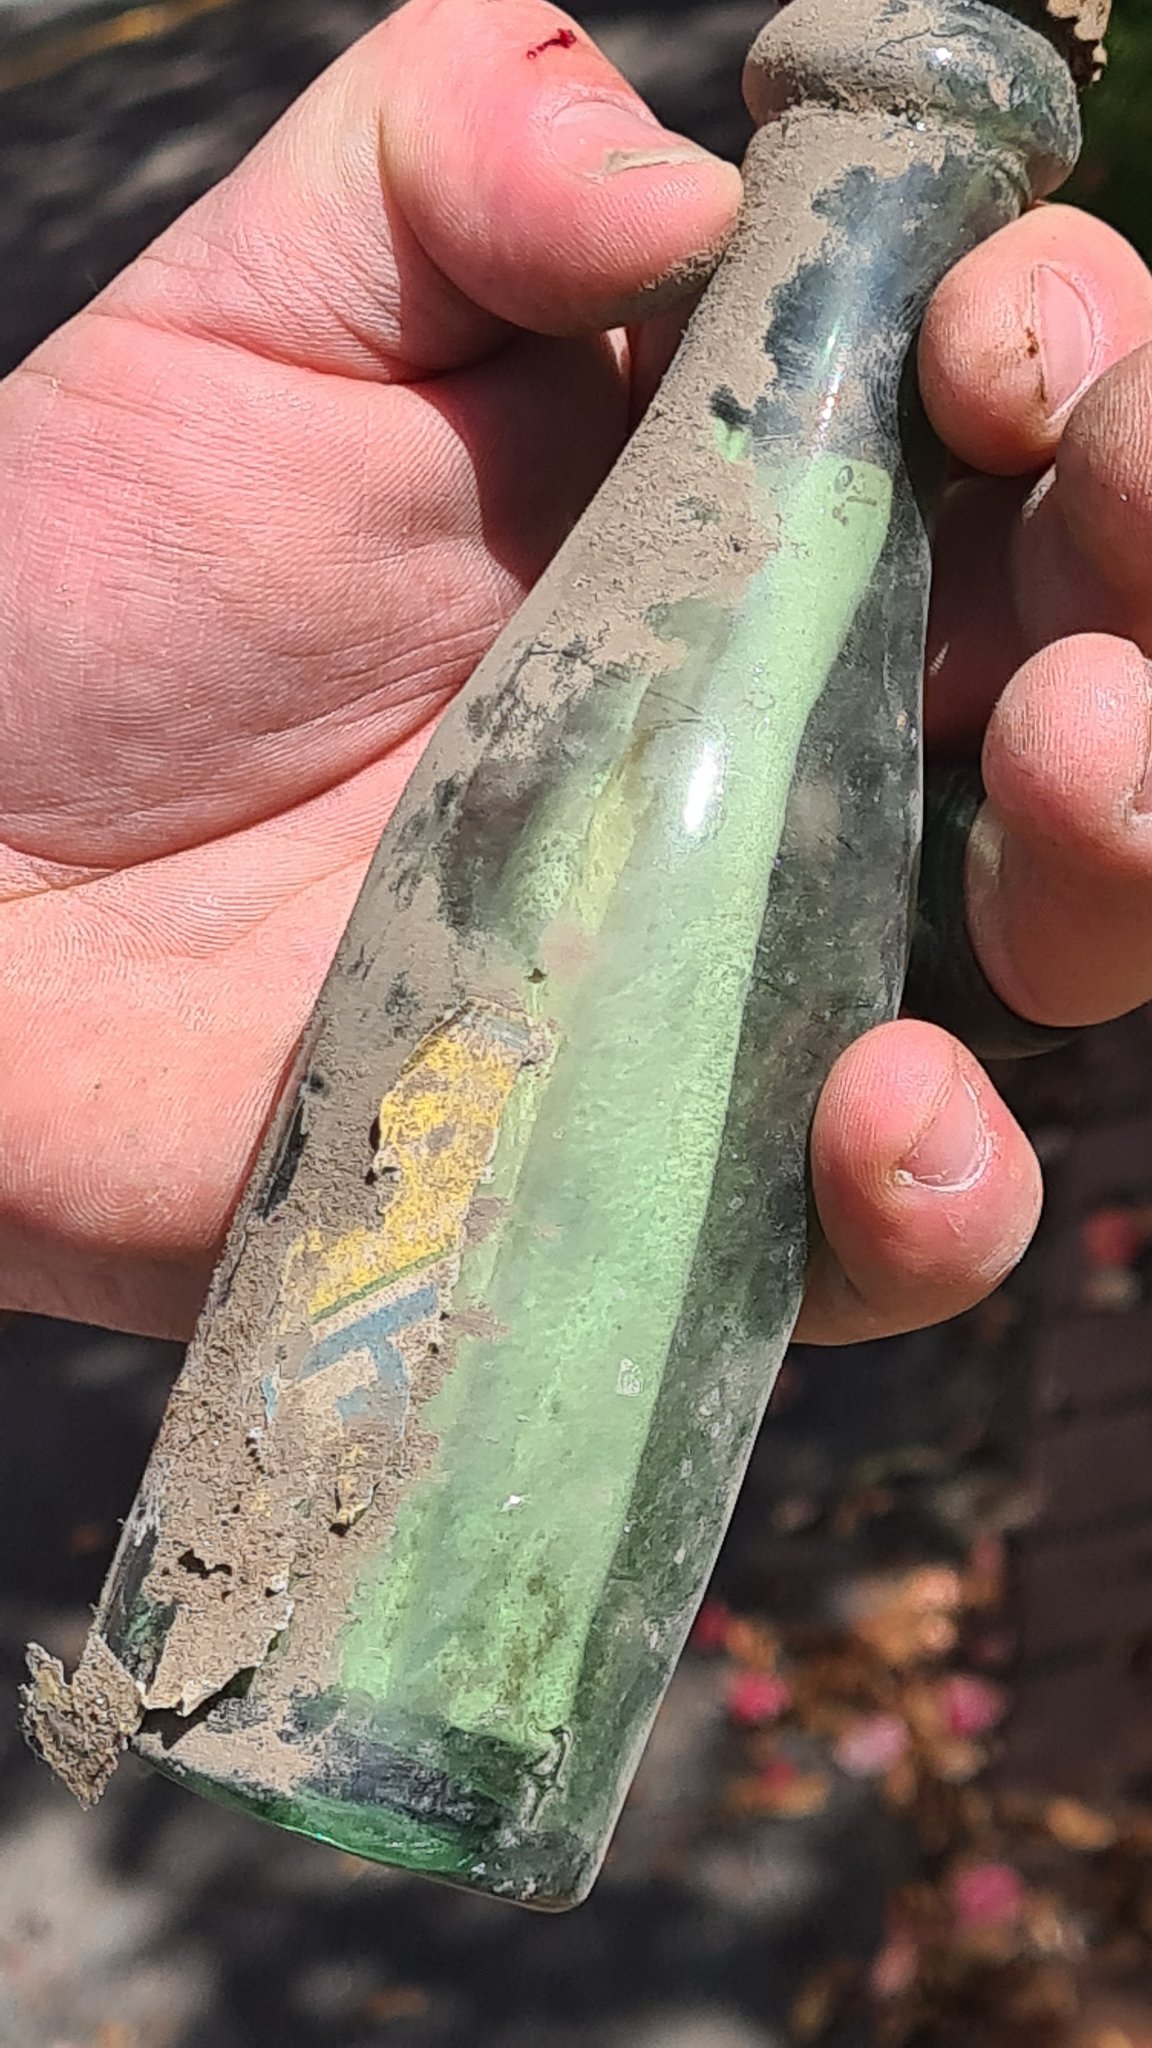 closeup of someone's hand holding an old, dirty green bottle with a letter inside.